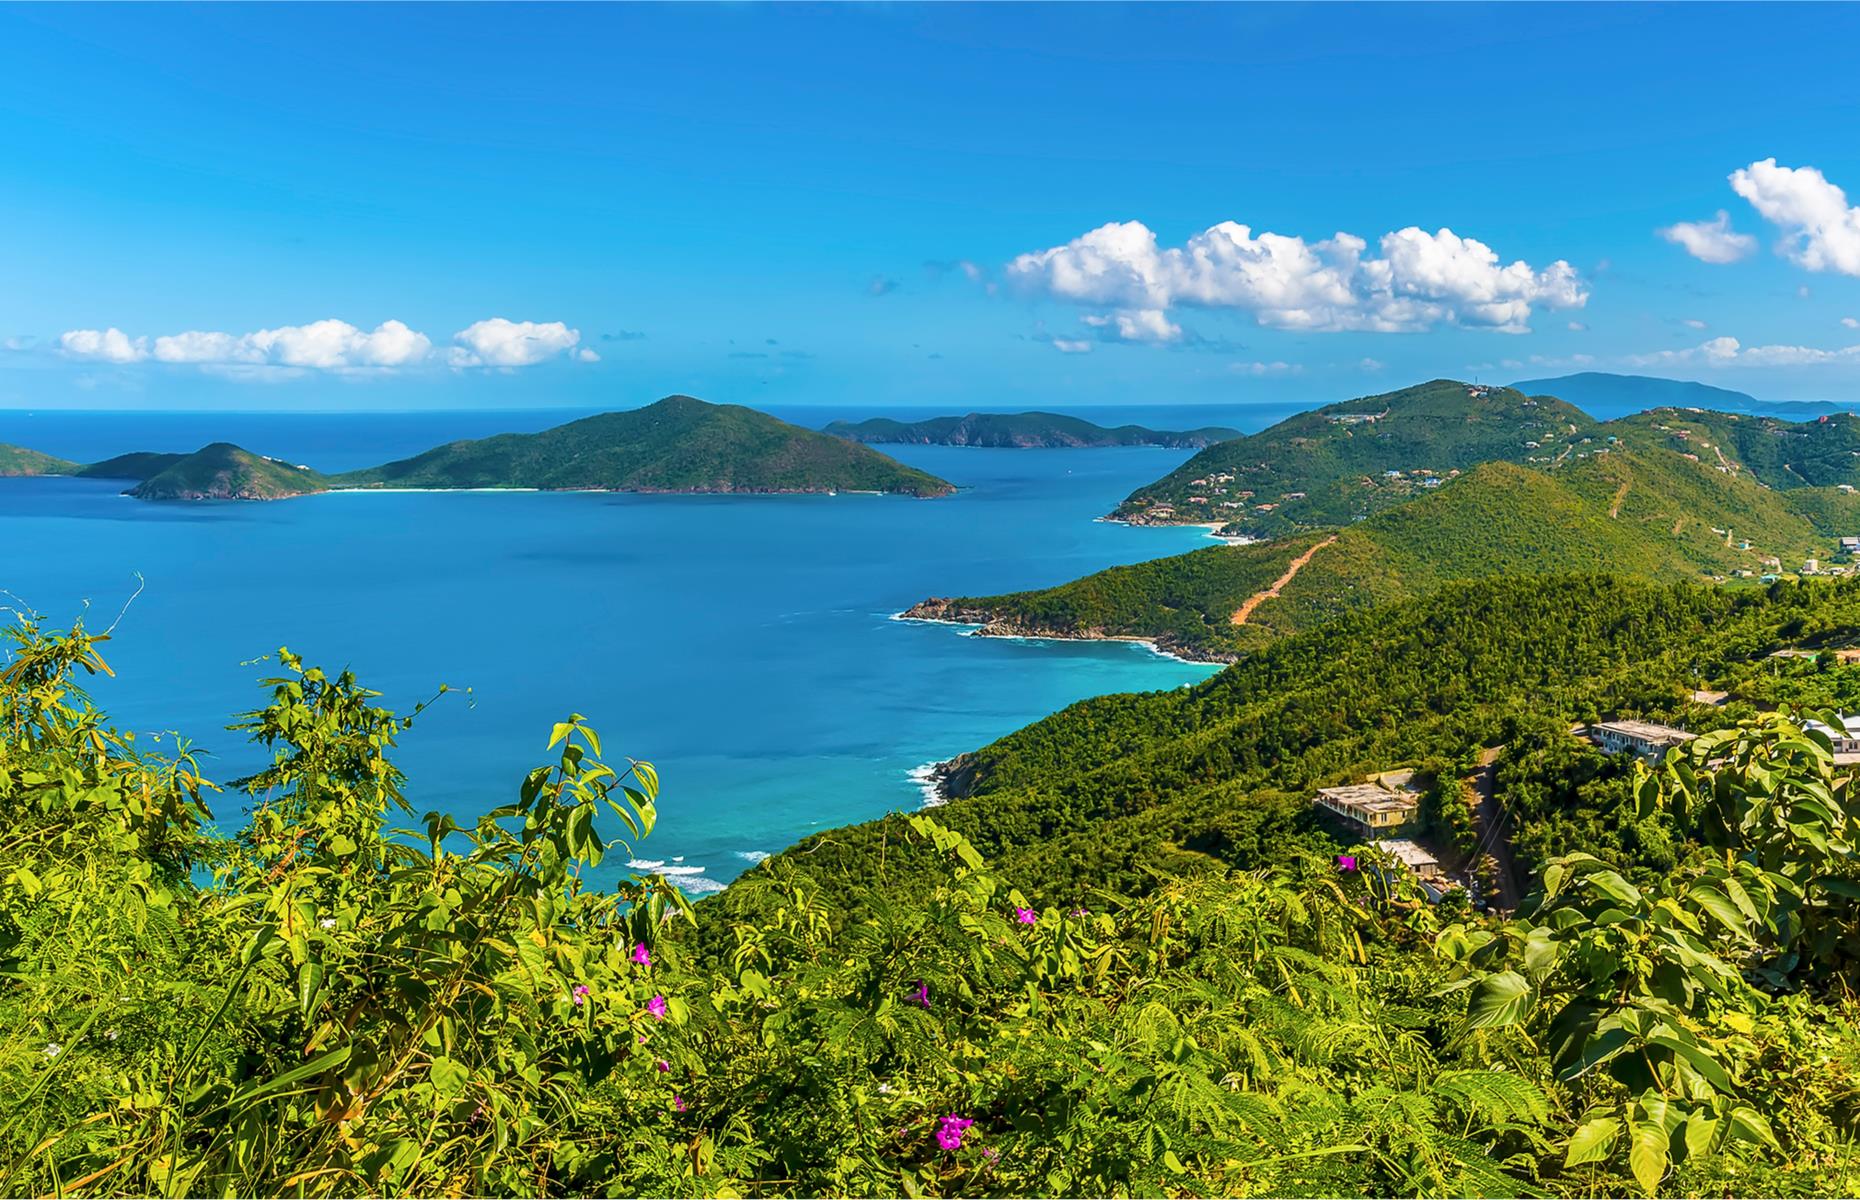 <p>Officially the Virgin Islands, but mostly known as the British Virgin Islands or BVIs, this cluster of Caribbean isles are a British Overseas Territory. Tortola, Virgin Gorda, Anegada and Jost Van Dyke are the main ones, with Tortola home to around 23,000 of the 27,800-strong population. Then around 50 other smaller islands and cays lie scattered within this swathe of Caribbean Sea, only 15 of which are inhabited. Although the BVIs are firmly on the cruise ship circuit, there are relatively few large hotels so peace and tranquility are guaranteed.</p>  <p><a href="https://www.loveexploring.com/gallerylist/69639/brilliant-british-islands-that-arent-in-britain"><strong>Here are more brilliant British islands that aren't in Britain</strong></a></p>